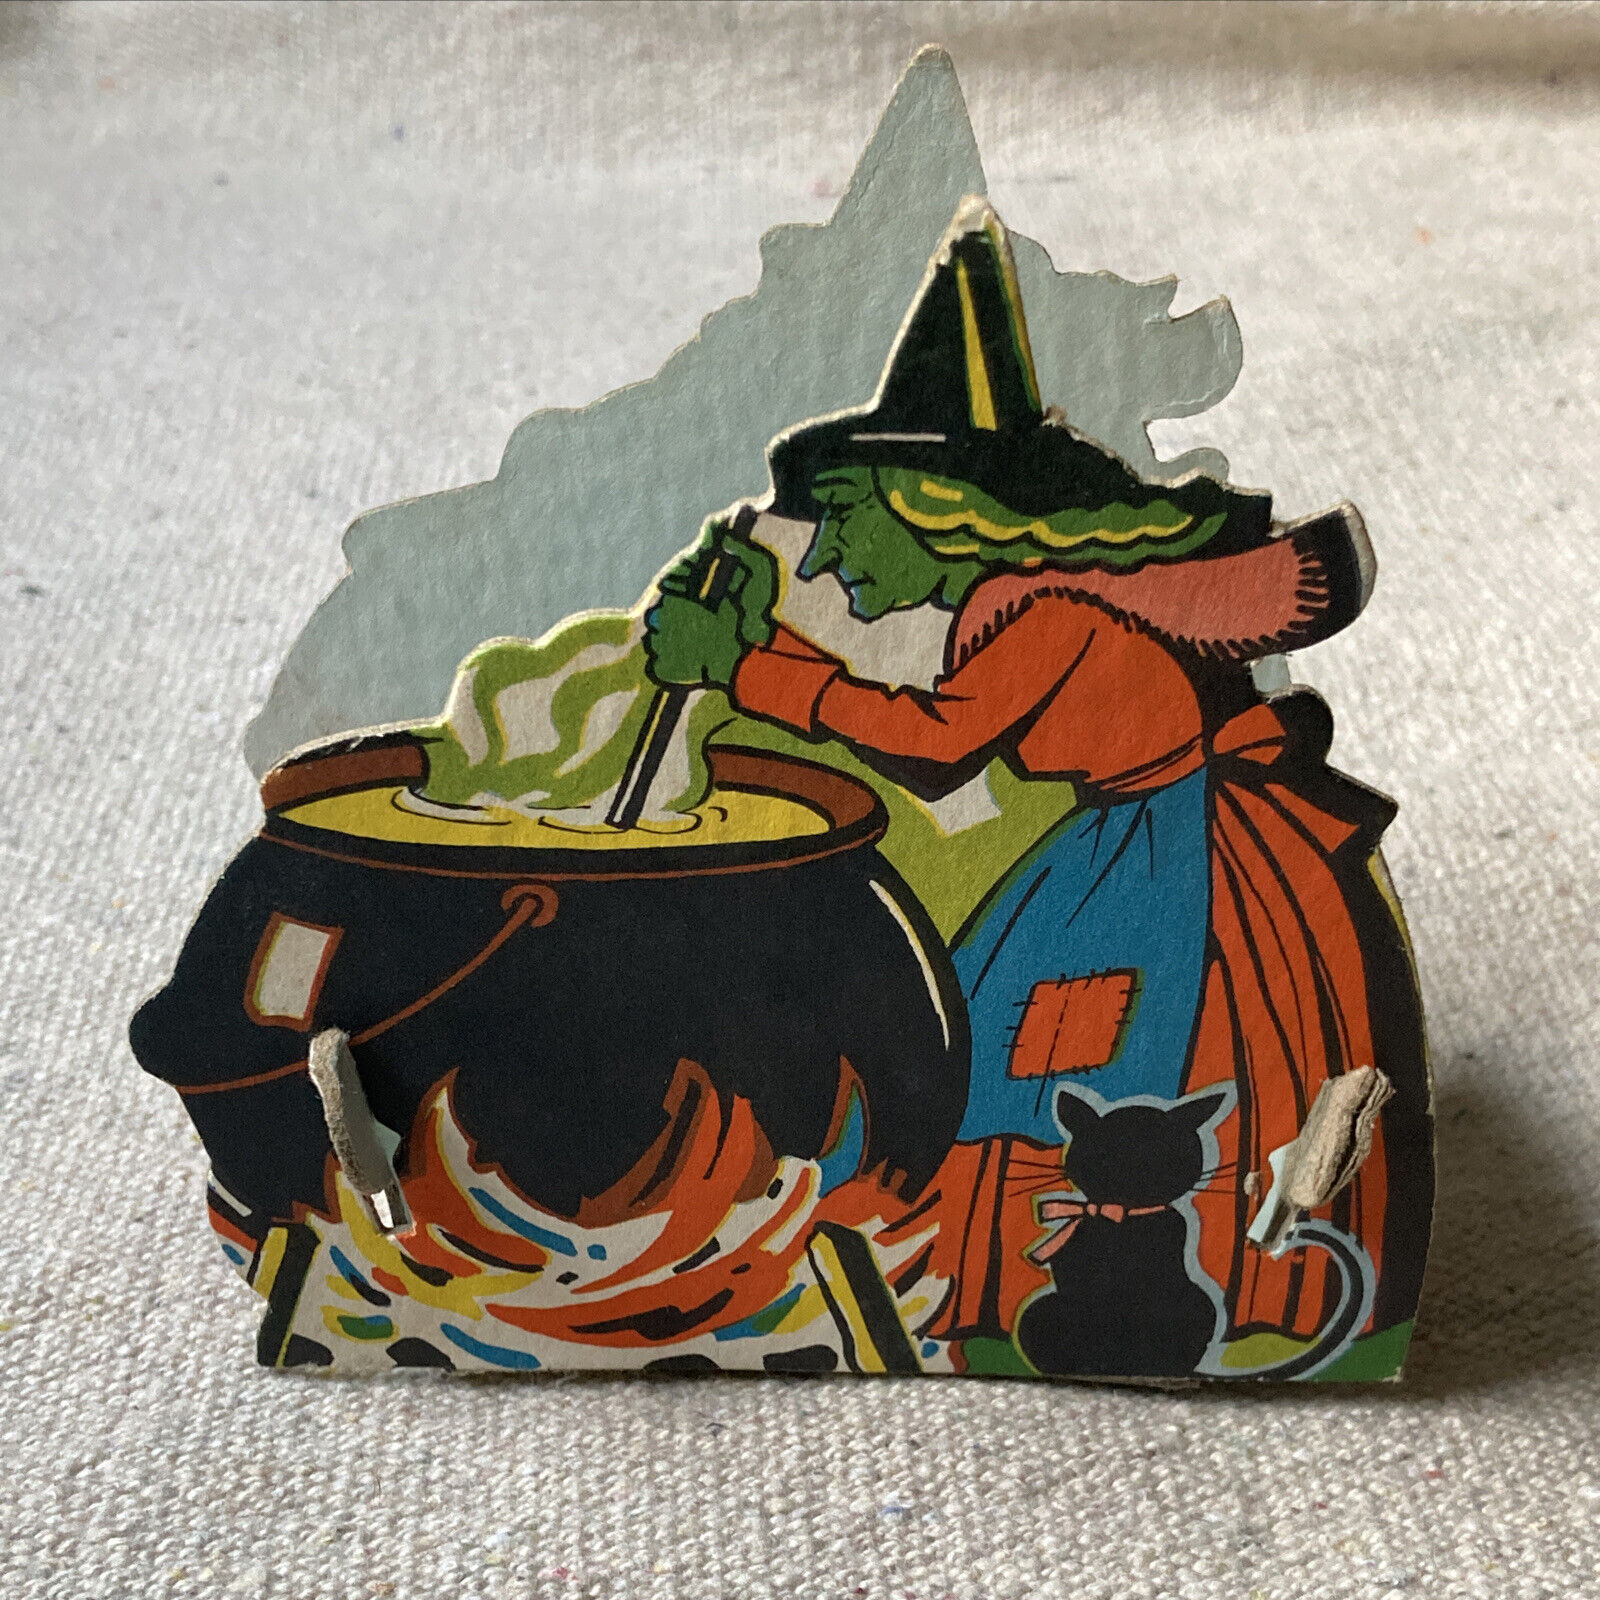 Vintage Cardboard Halloween Candy Container Witch Caldron Prop Display G.M.CO